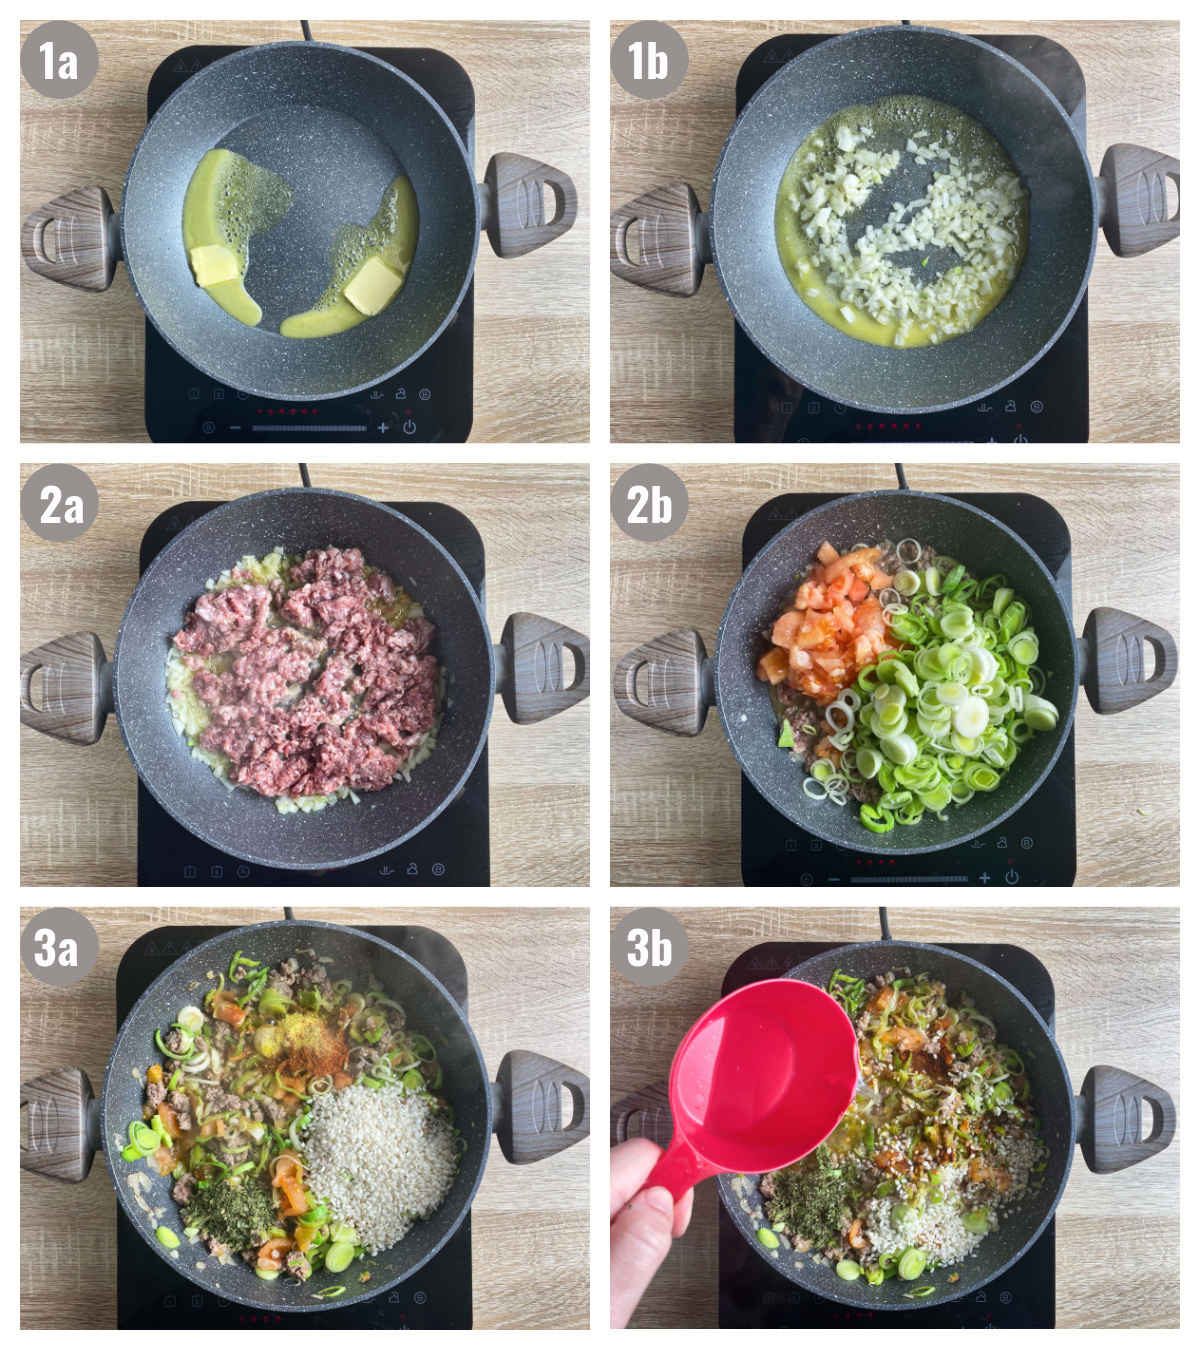 Six photos, two by three, of black pan on an induction stove with different risotto ingredients in it: butter, onion and garlic, meat, veggies with leeks, rice and seasonings, and water.